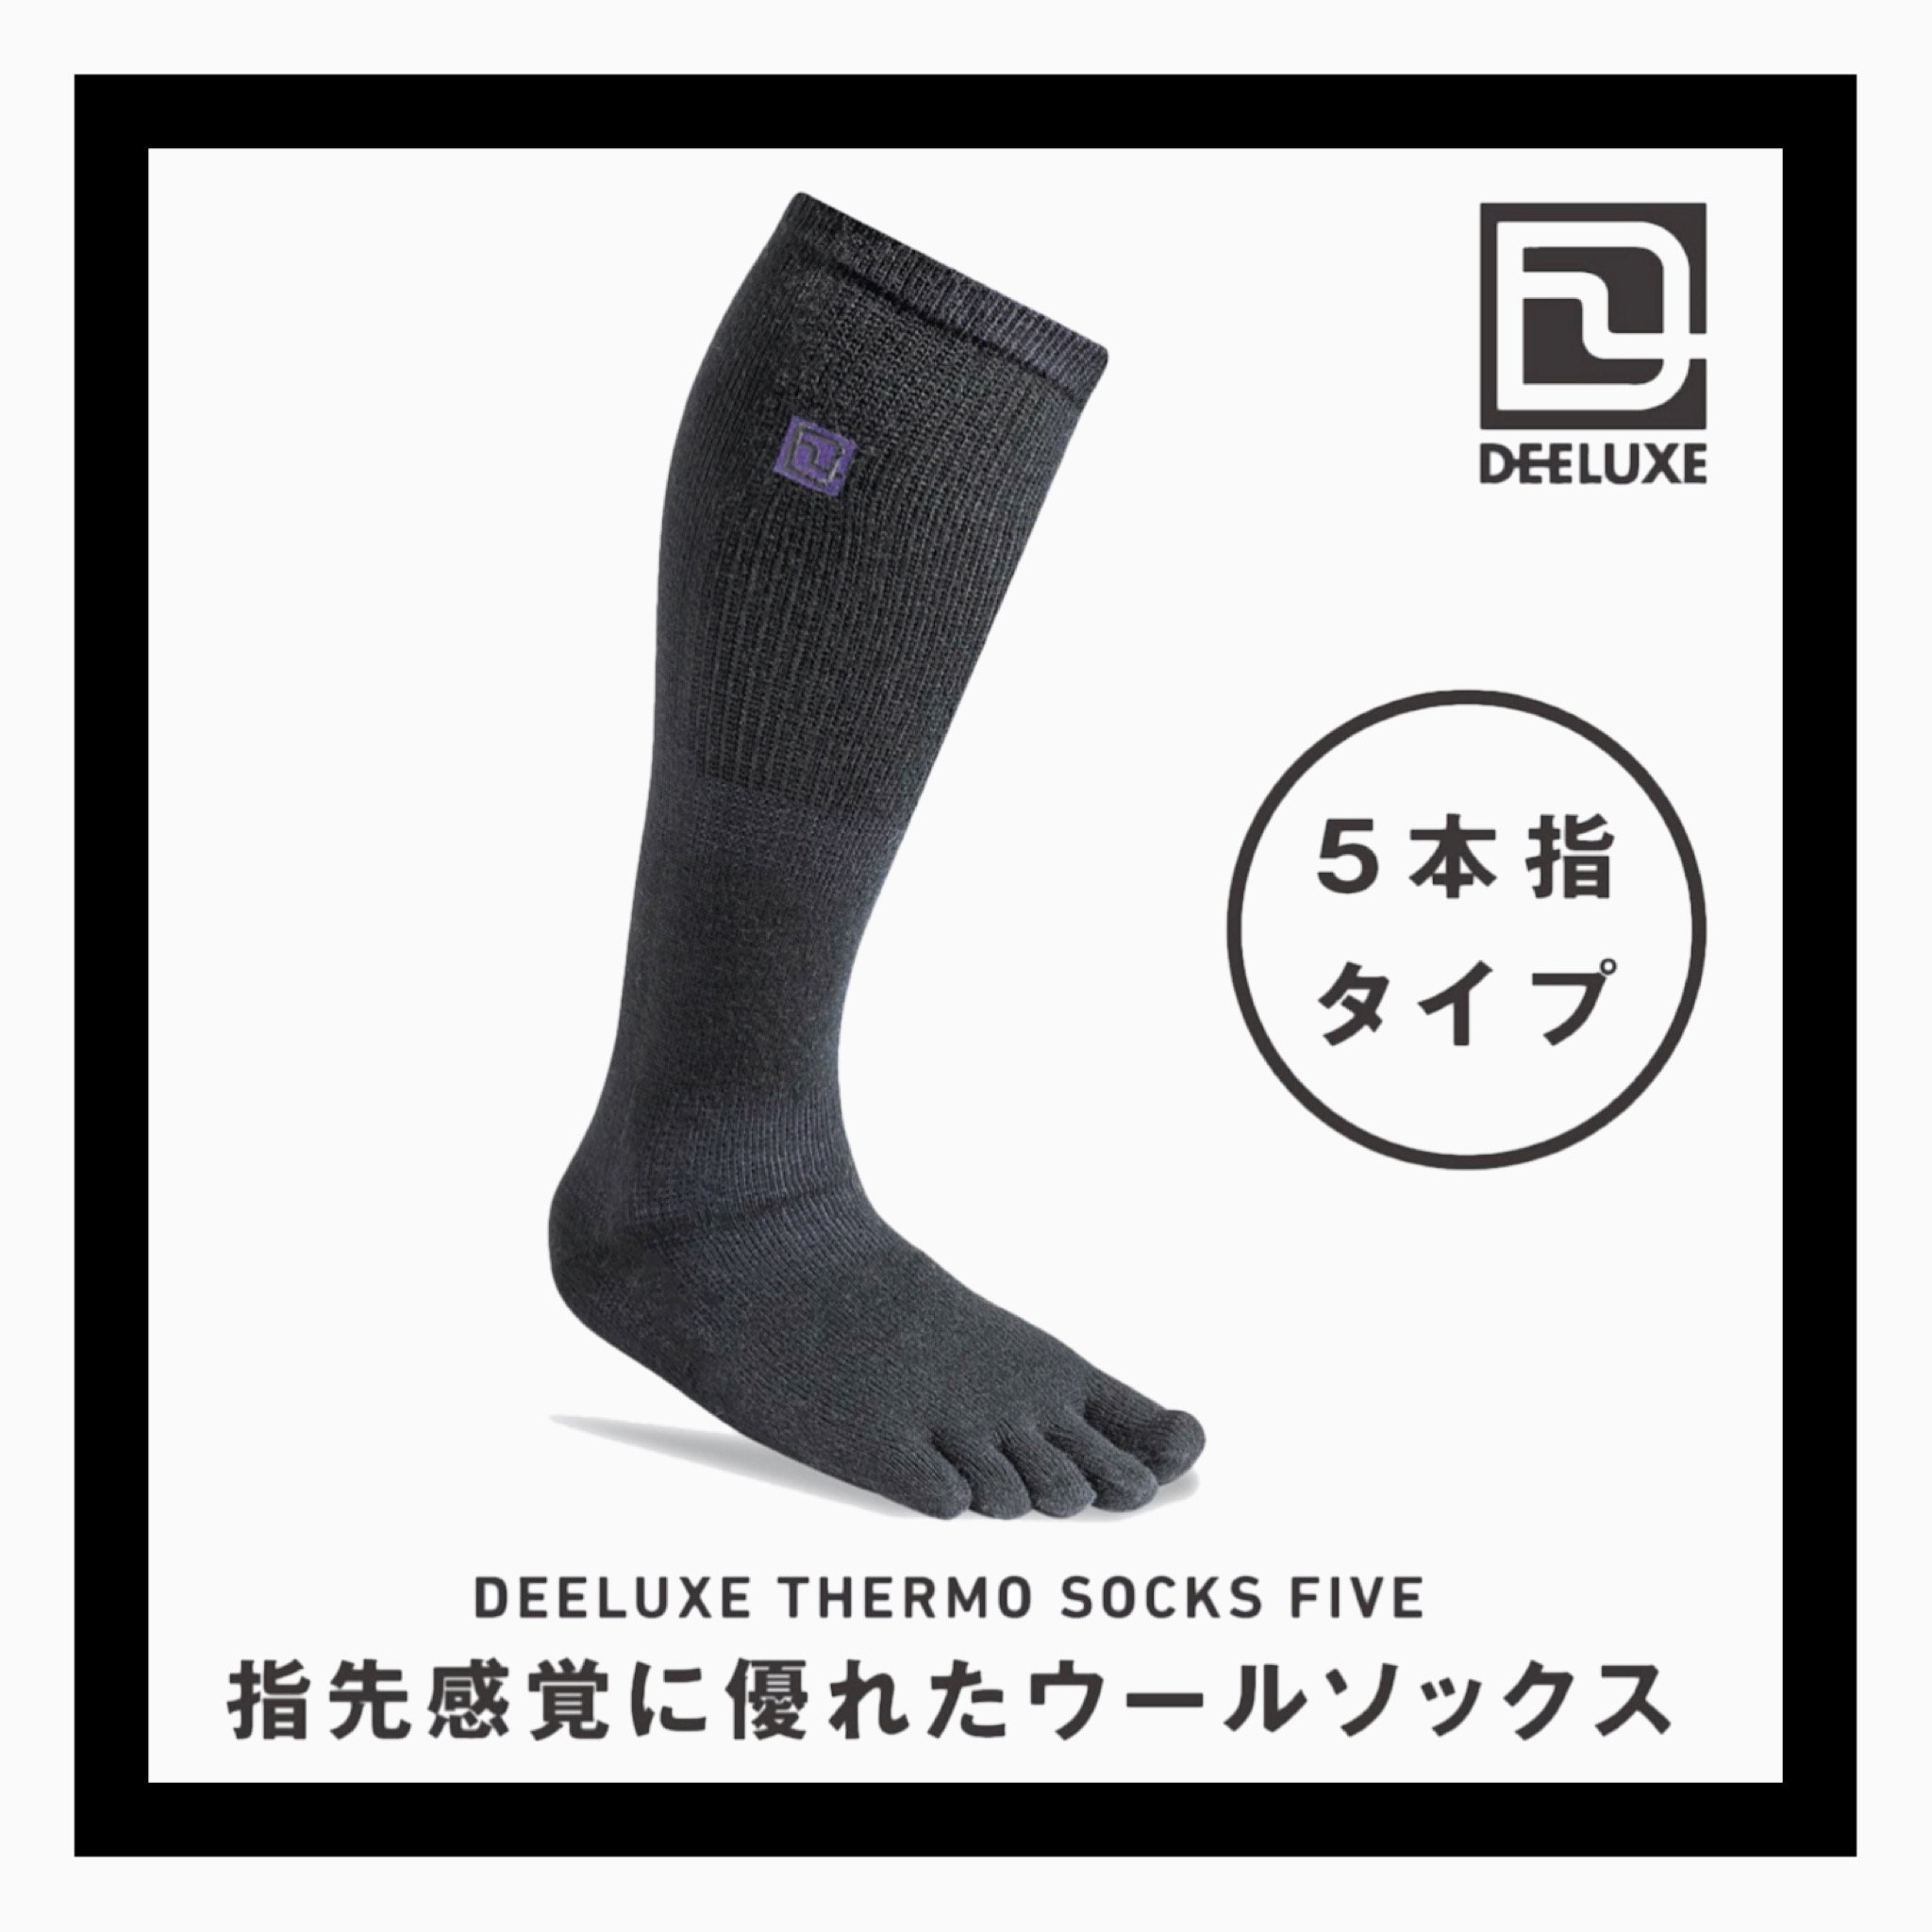 DEELUXE THERMO SOCKS FIVE - JOINT HOUSE